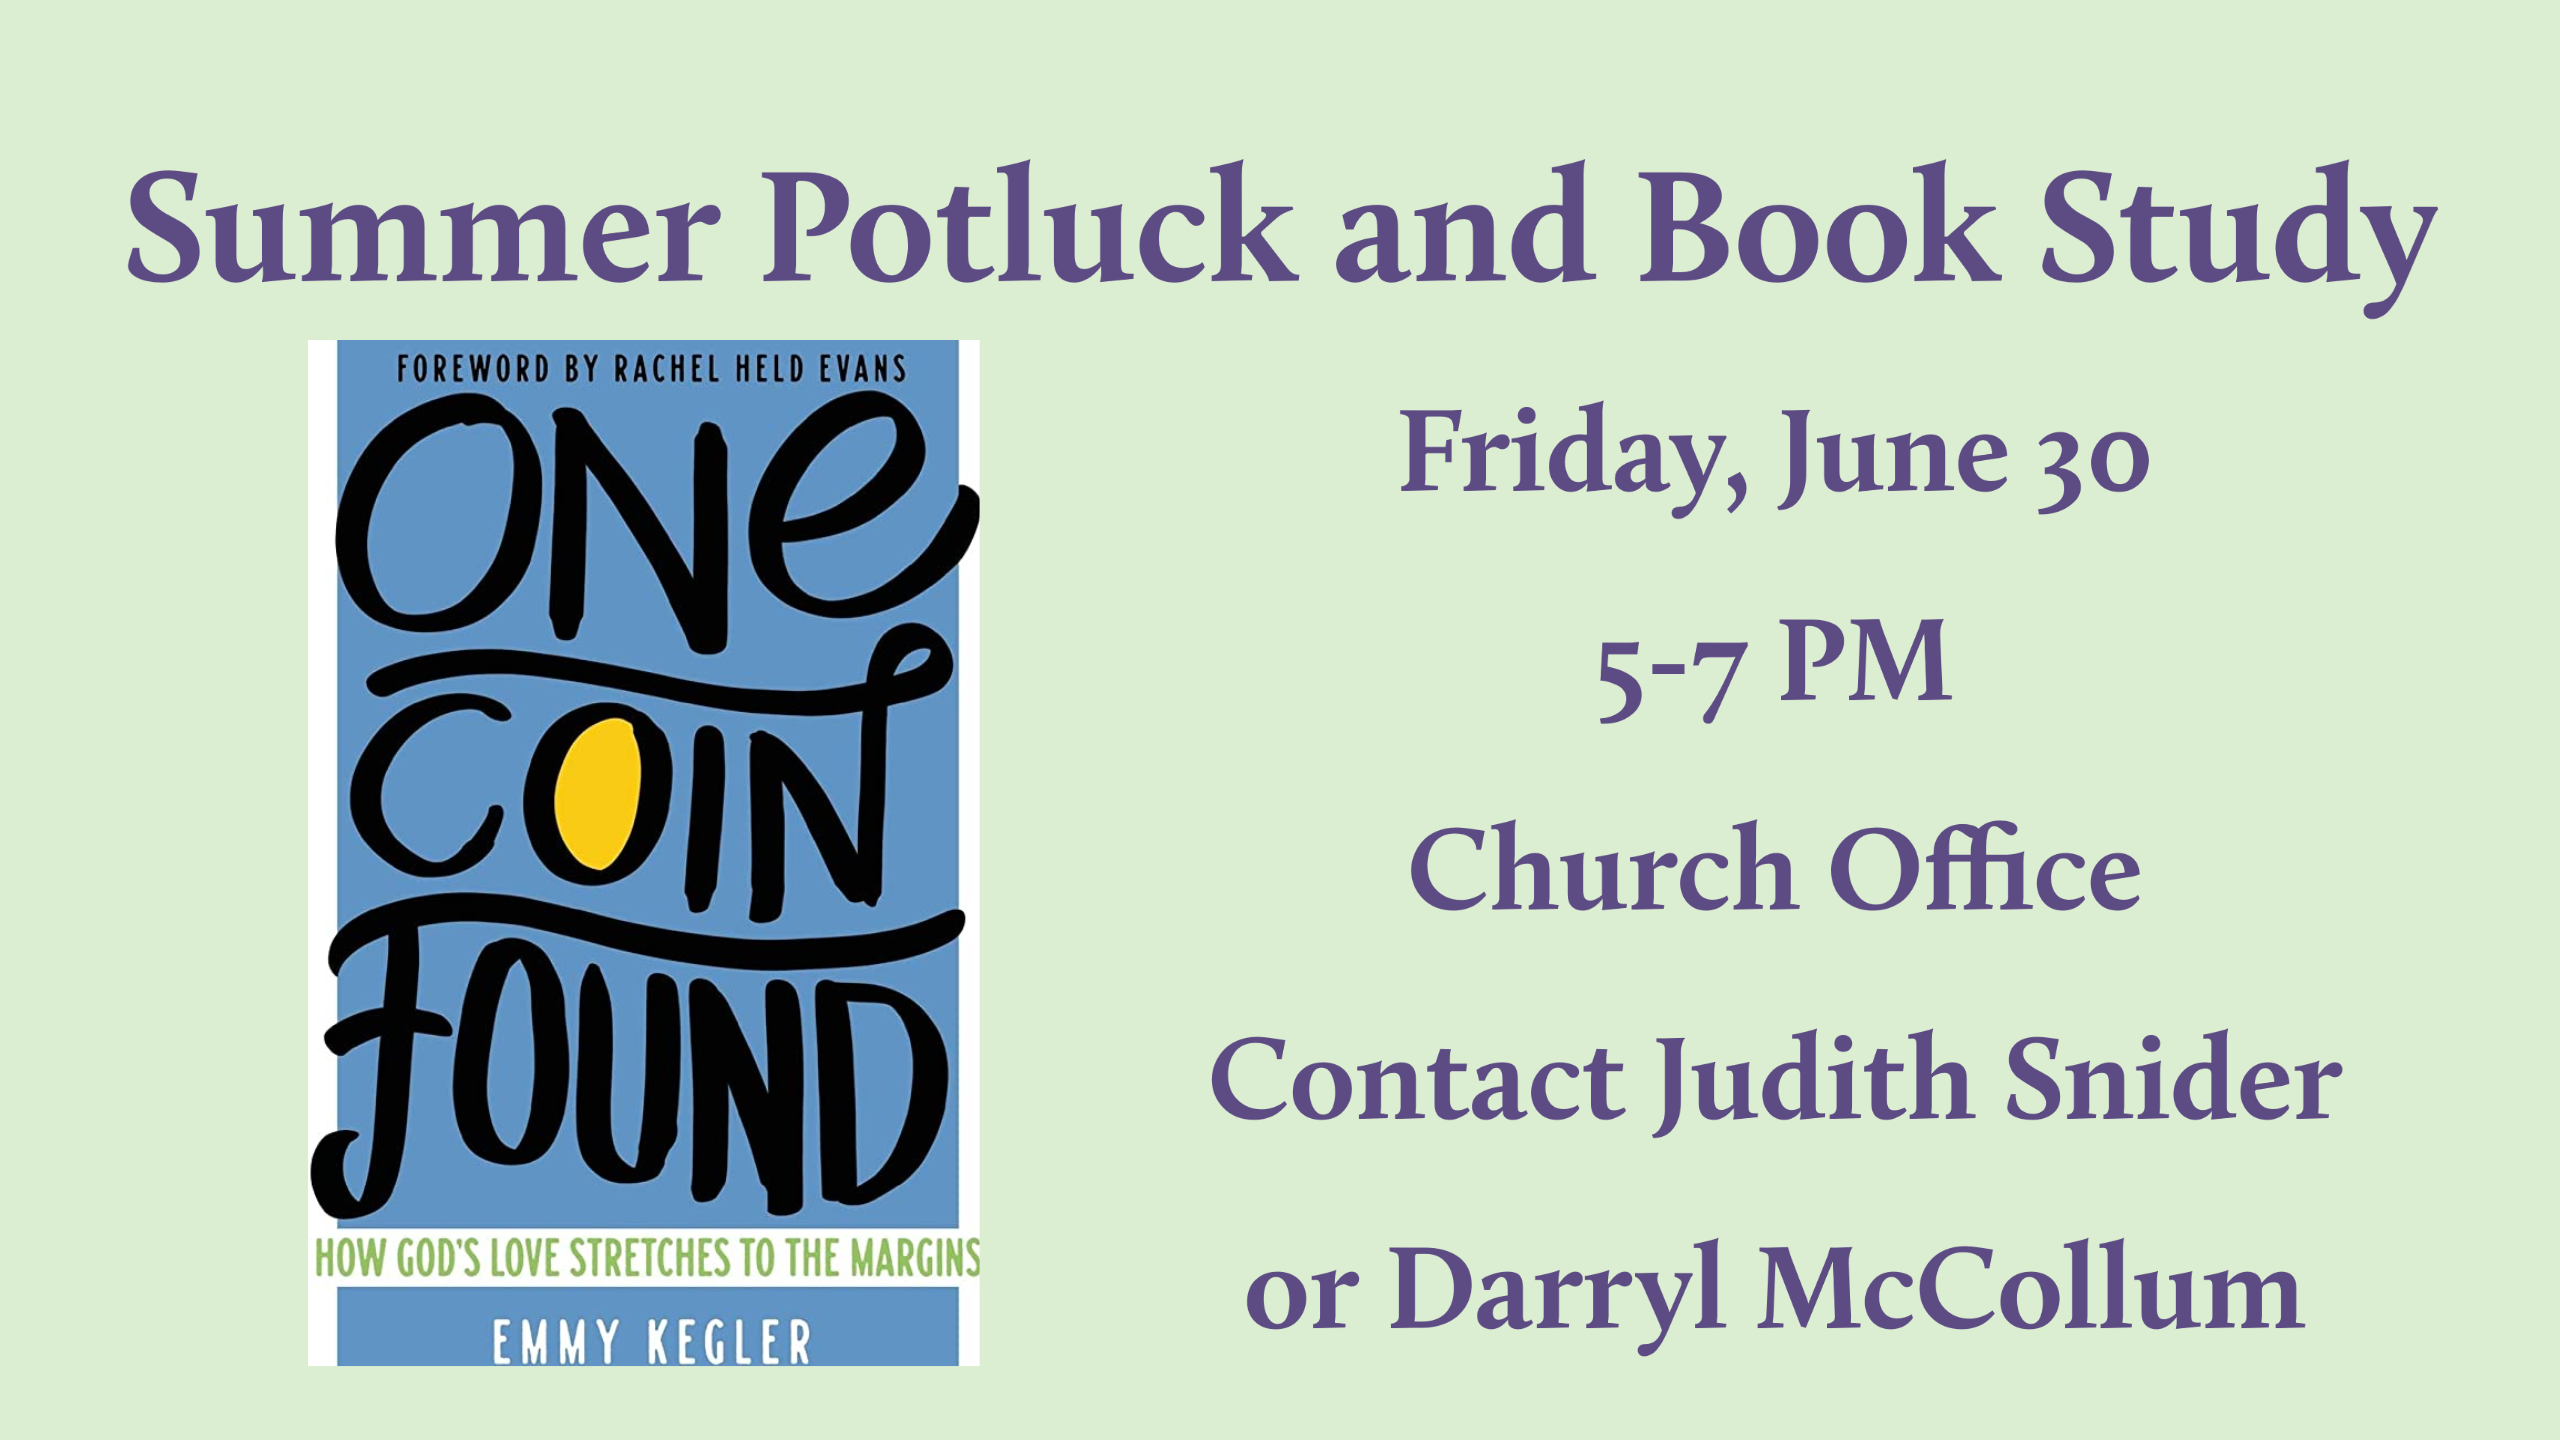 cover of One Coin Found with purple text on a green background reading "Summer Potluck and Book Study Friday, June 30 5-7 PM Church Office Contact Judith Snider or Darryl McCollum"